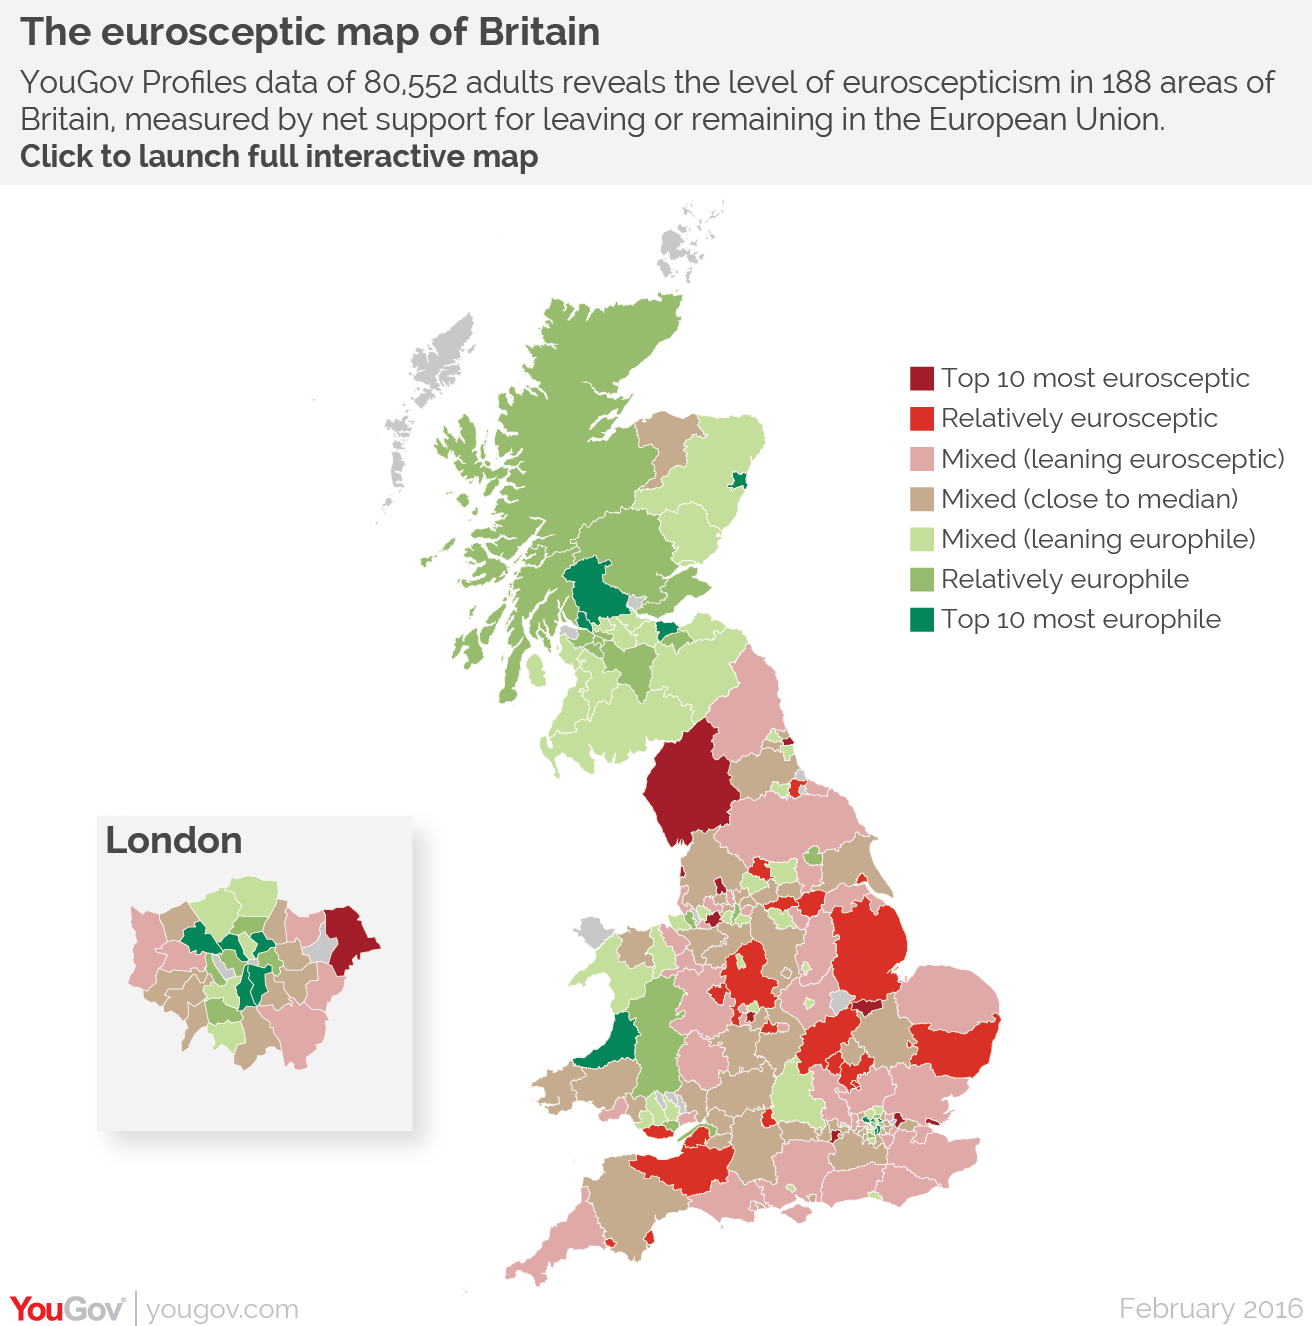 Map Uk Eu Referendum Results New YouGov Profiles research of over 80,000 people reveals the most and least Eurosceptic areas of Britain